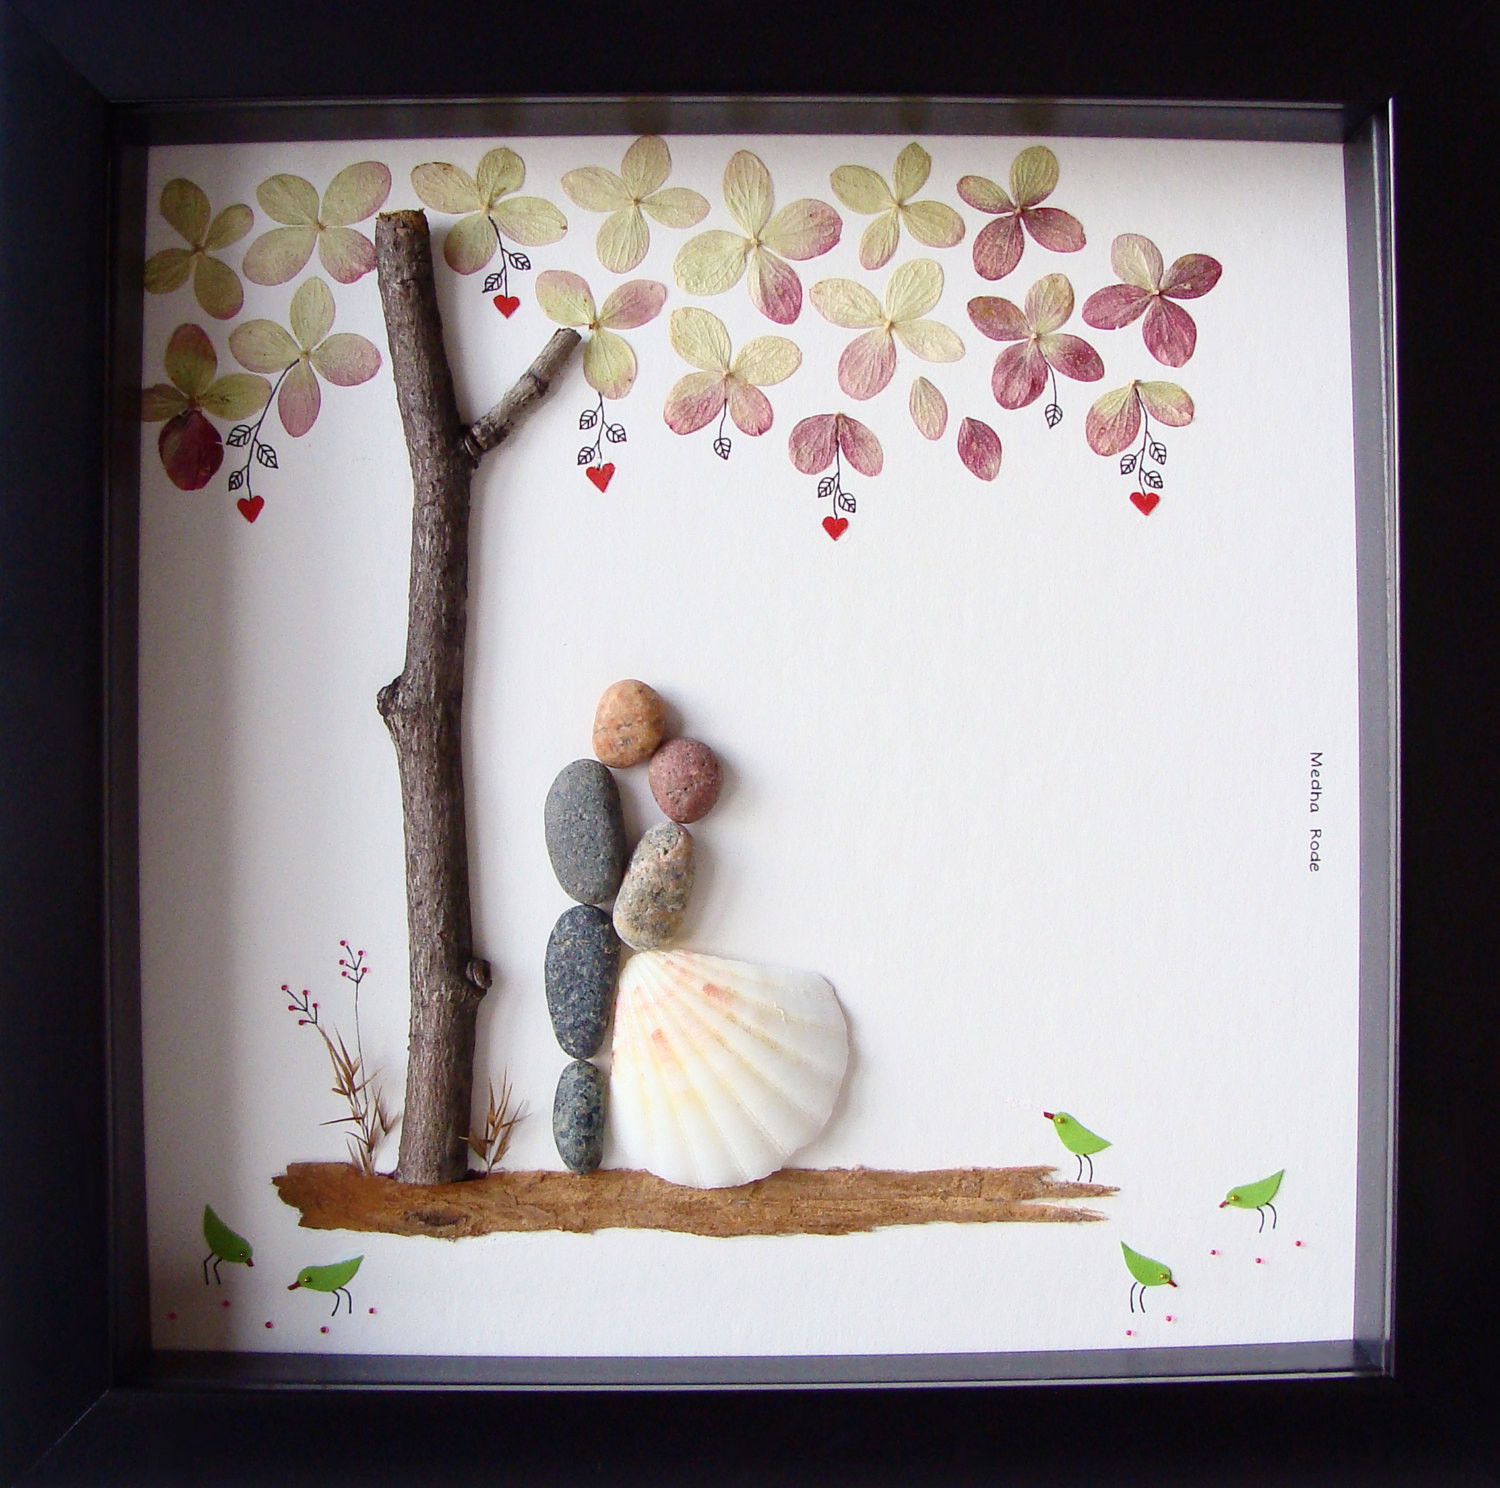 Unique Gift Ideas For Couples
 Unique Wedding Gift For Couple Wedding Pebble Art by MedhaRode